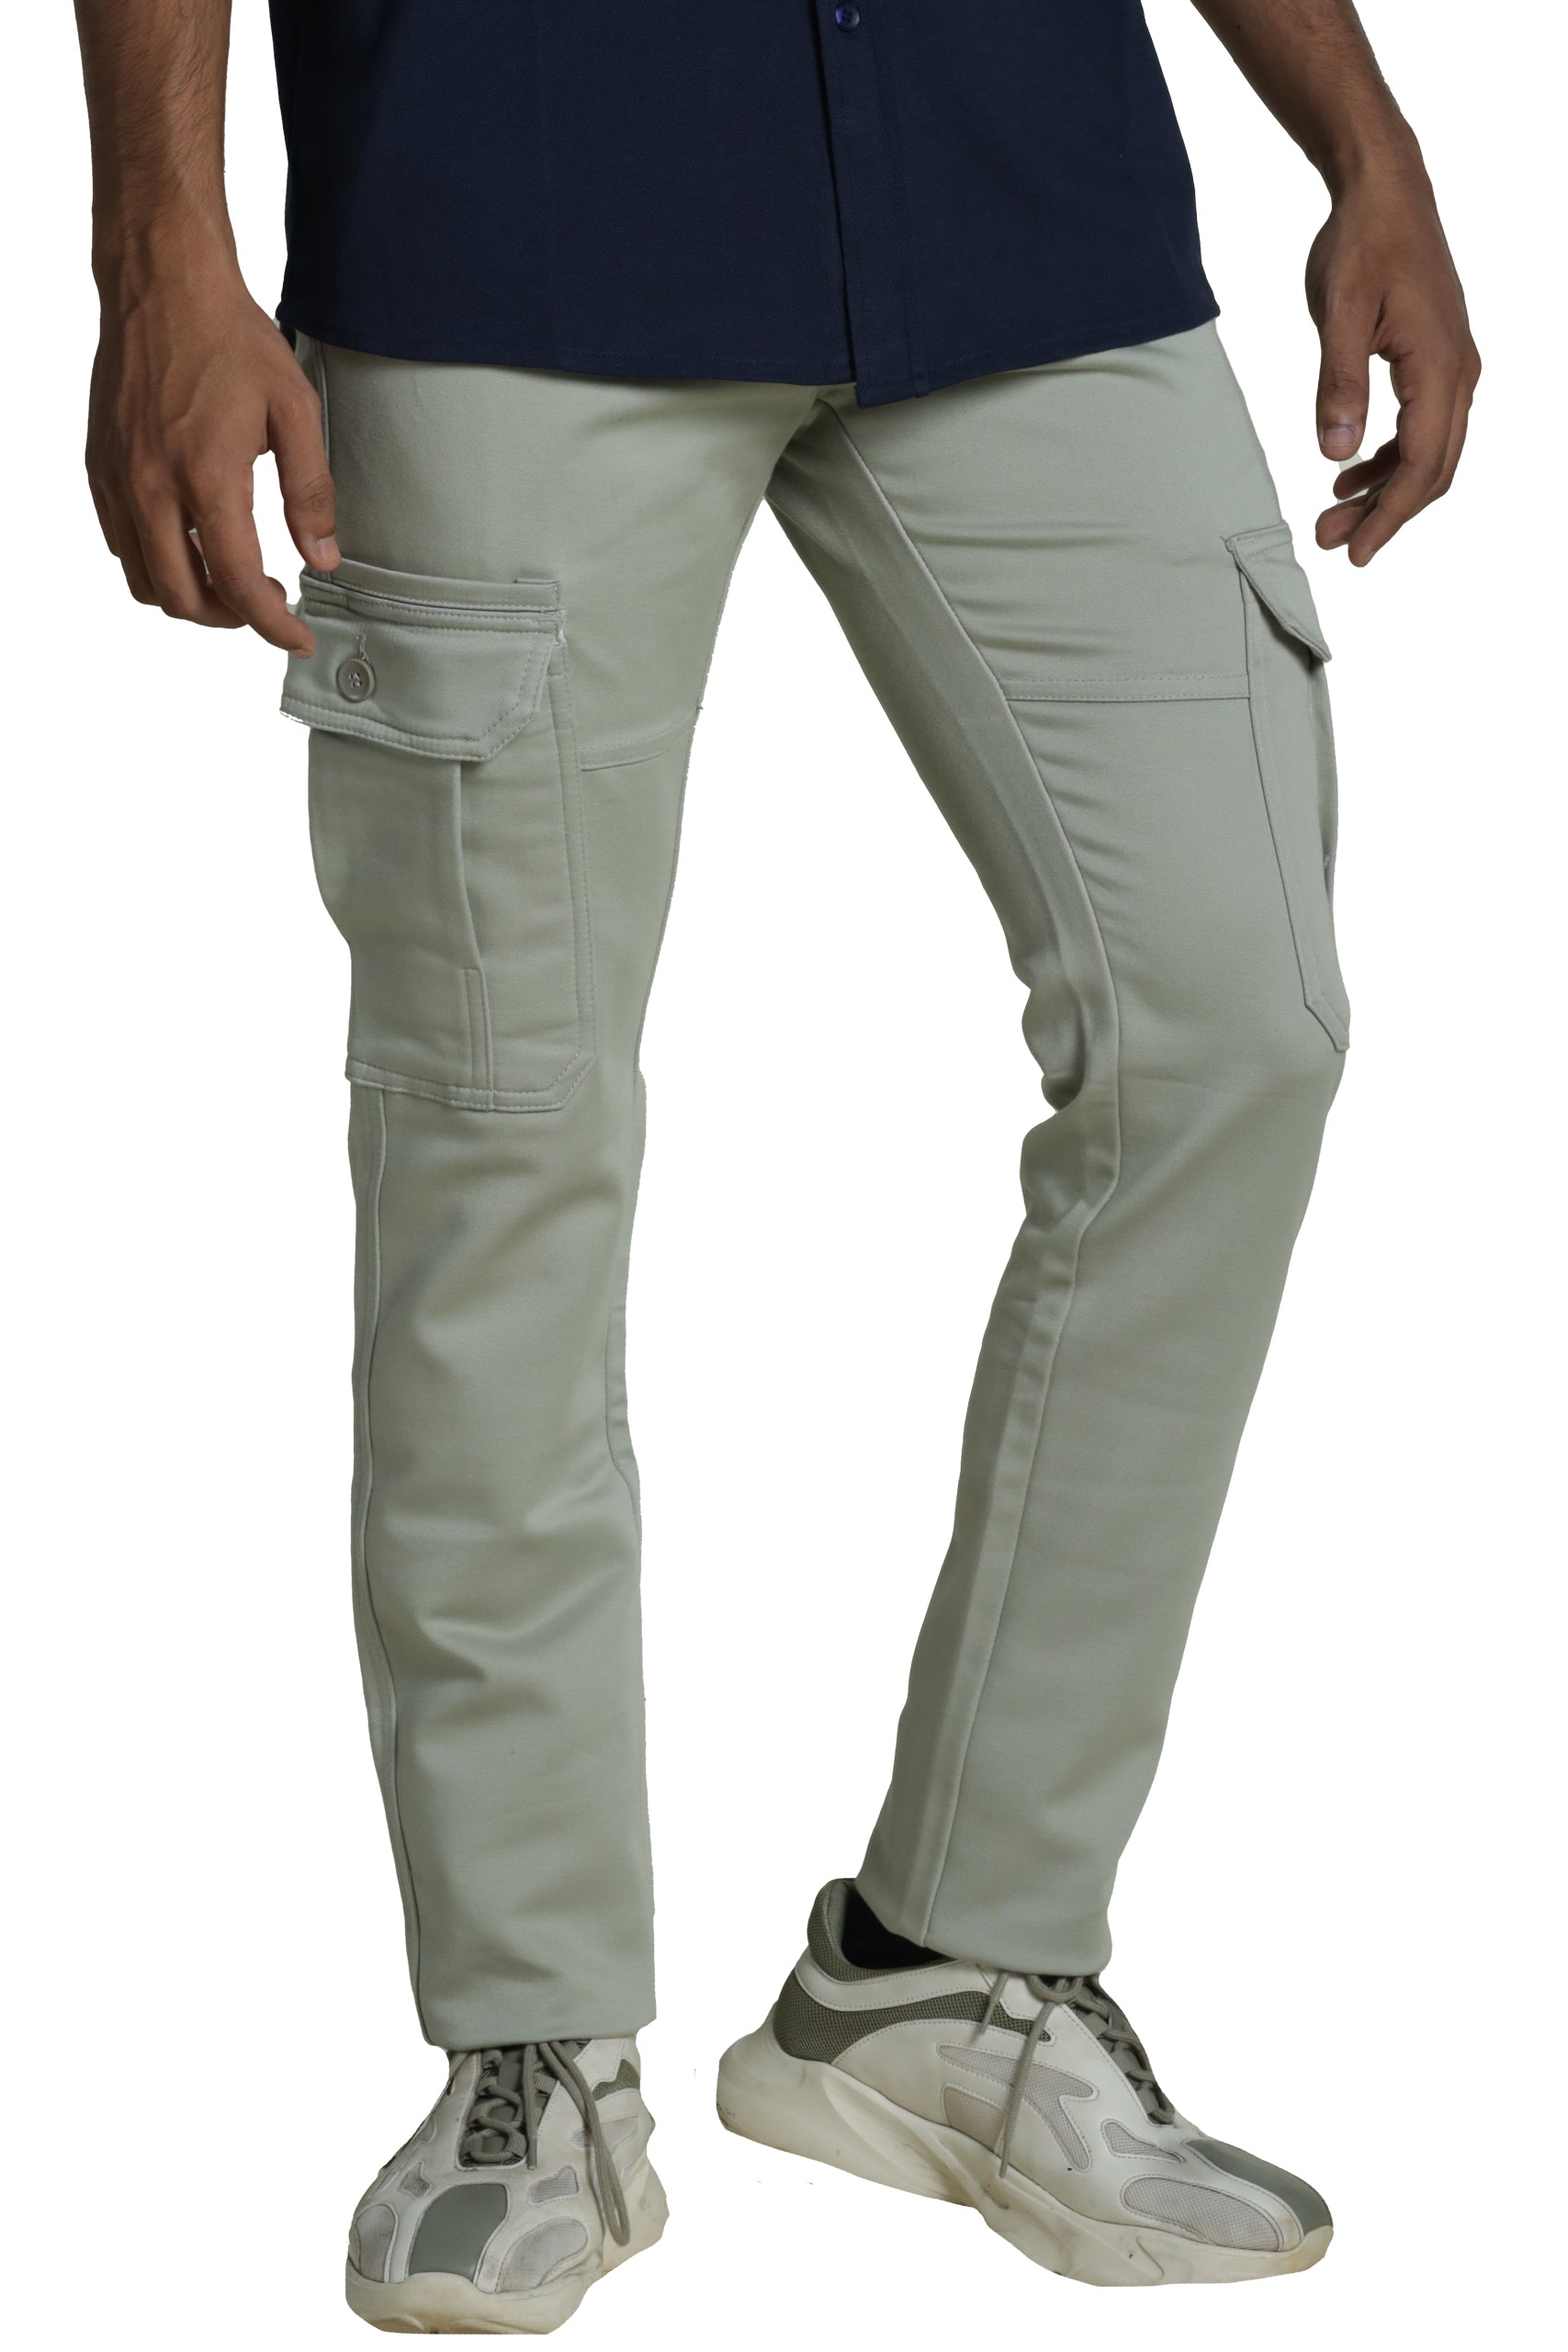 Foliage Green Straight Fit Rhysley Men's Jeans - Buy Online in India @ Mehar